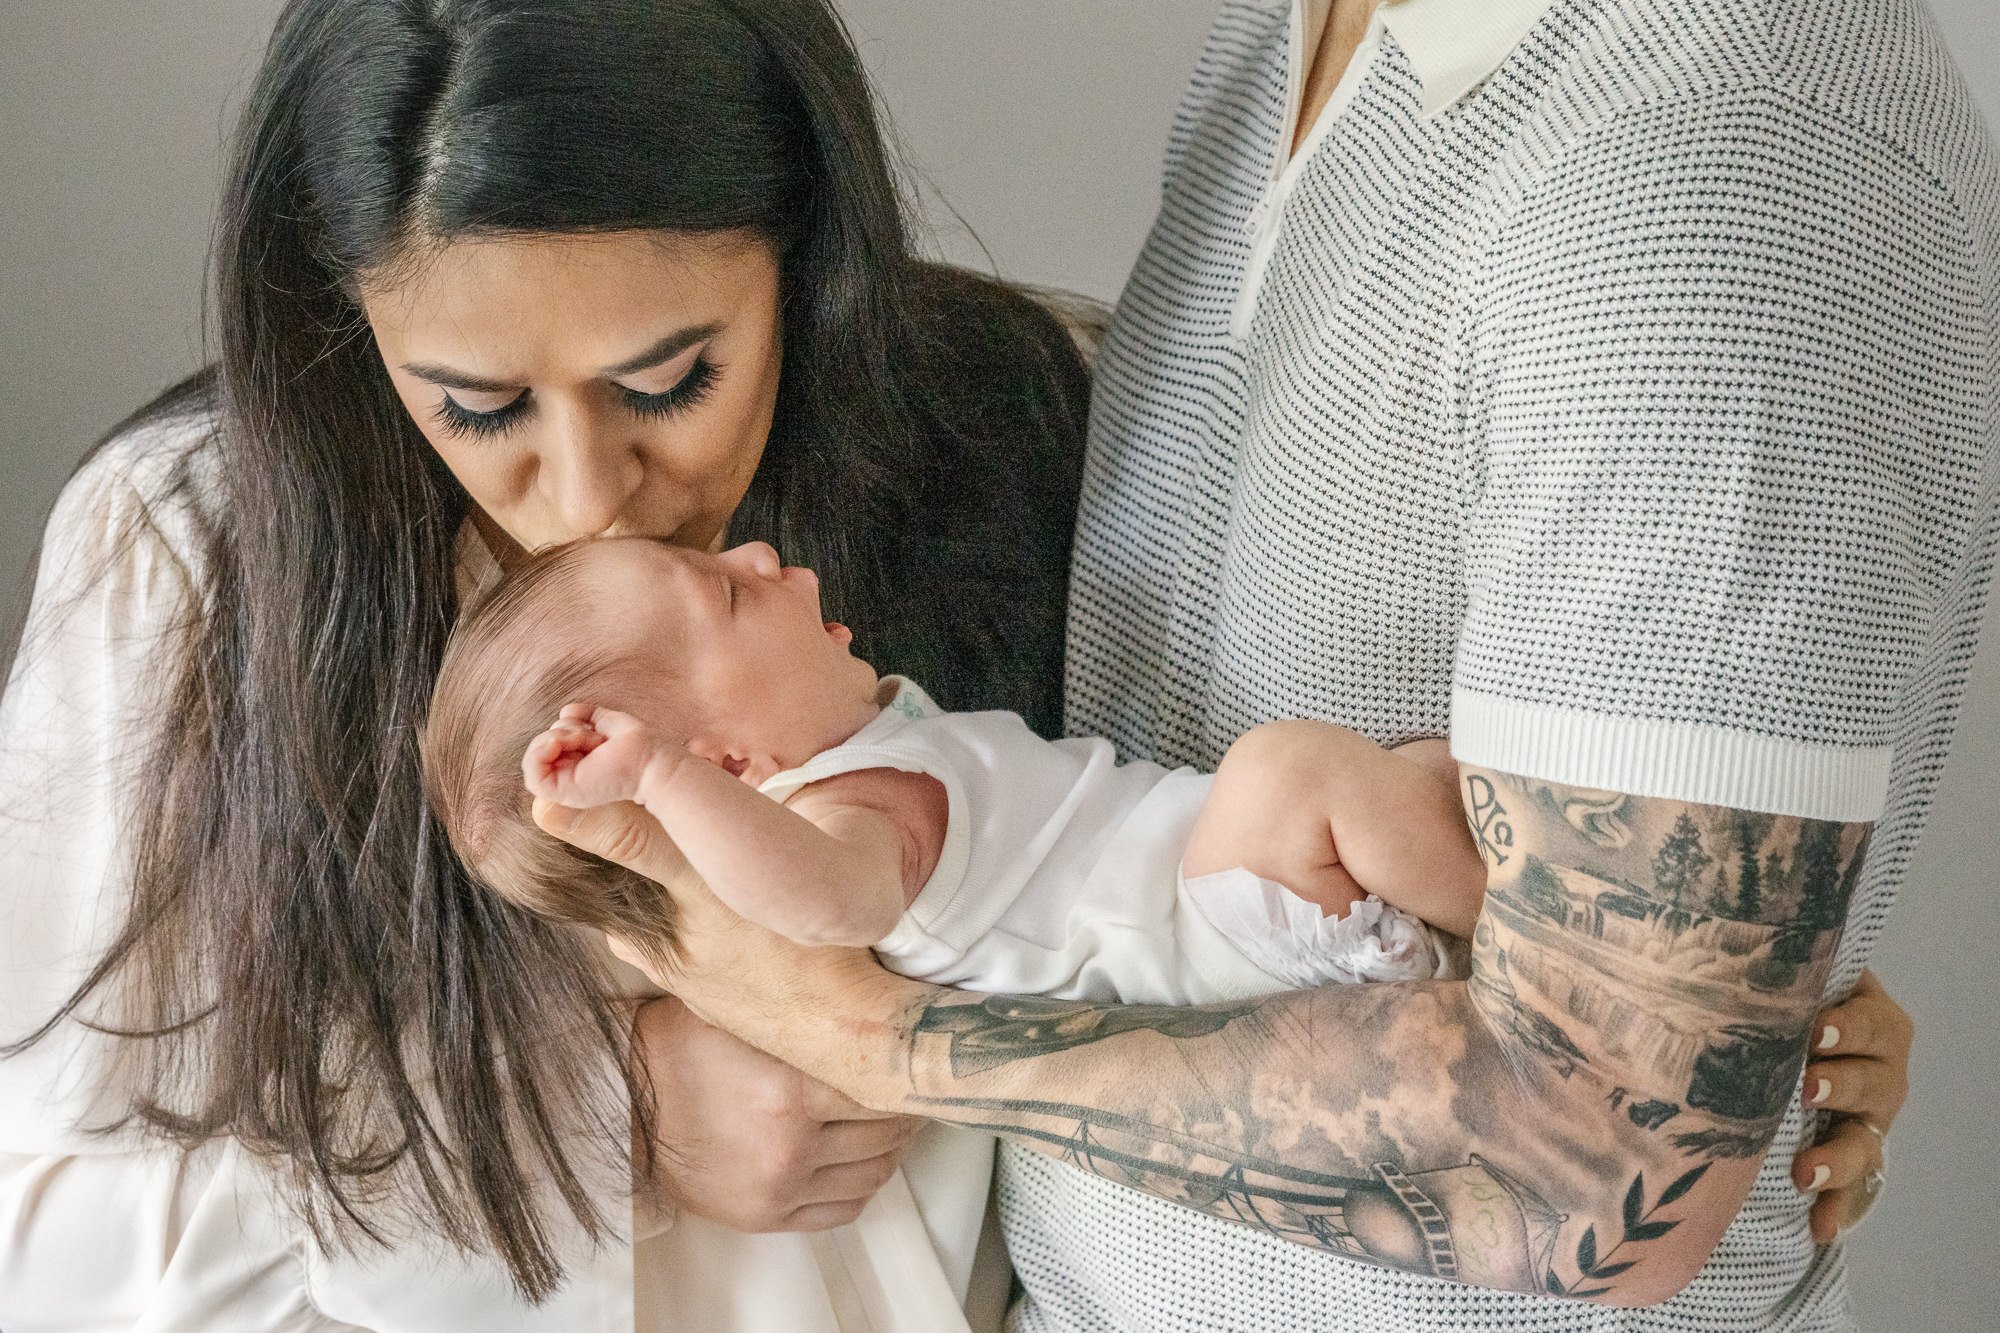  Family dressed in neutrals for in-home newborn photo session with Nicole Hawkins photography. Mom tenderly places a kiss on newborn daughter’s head. Photo showcases dad’s sleeve of intricate tattoos. #centralNewJerseyphotographer #inhomeportraits #n